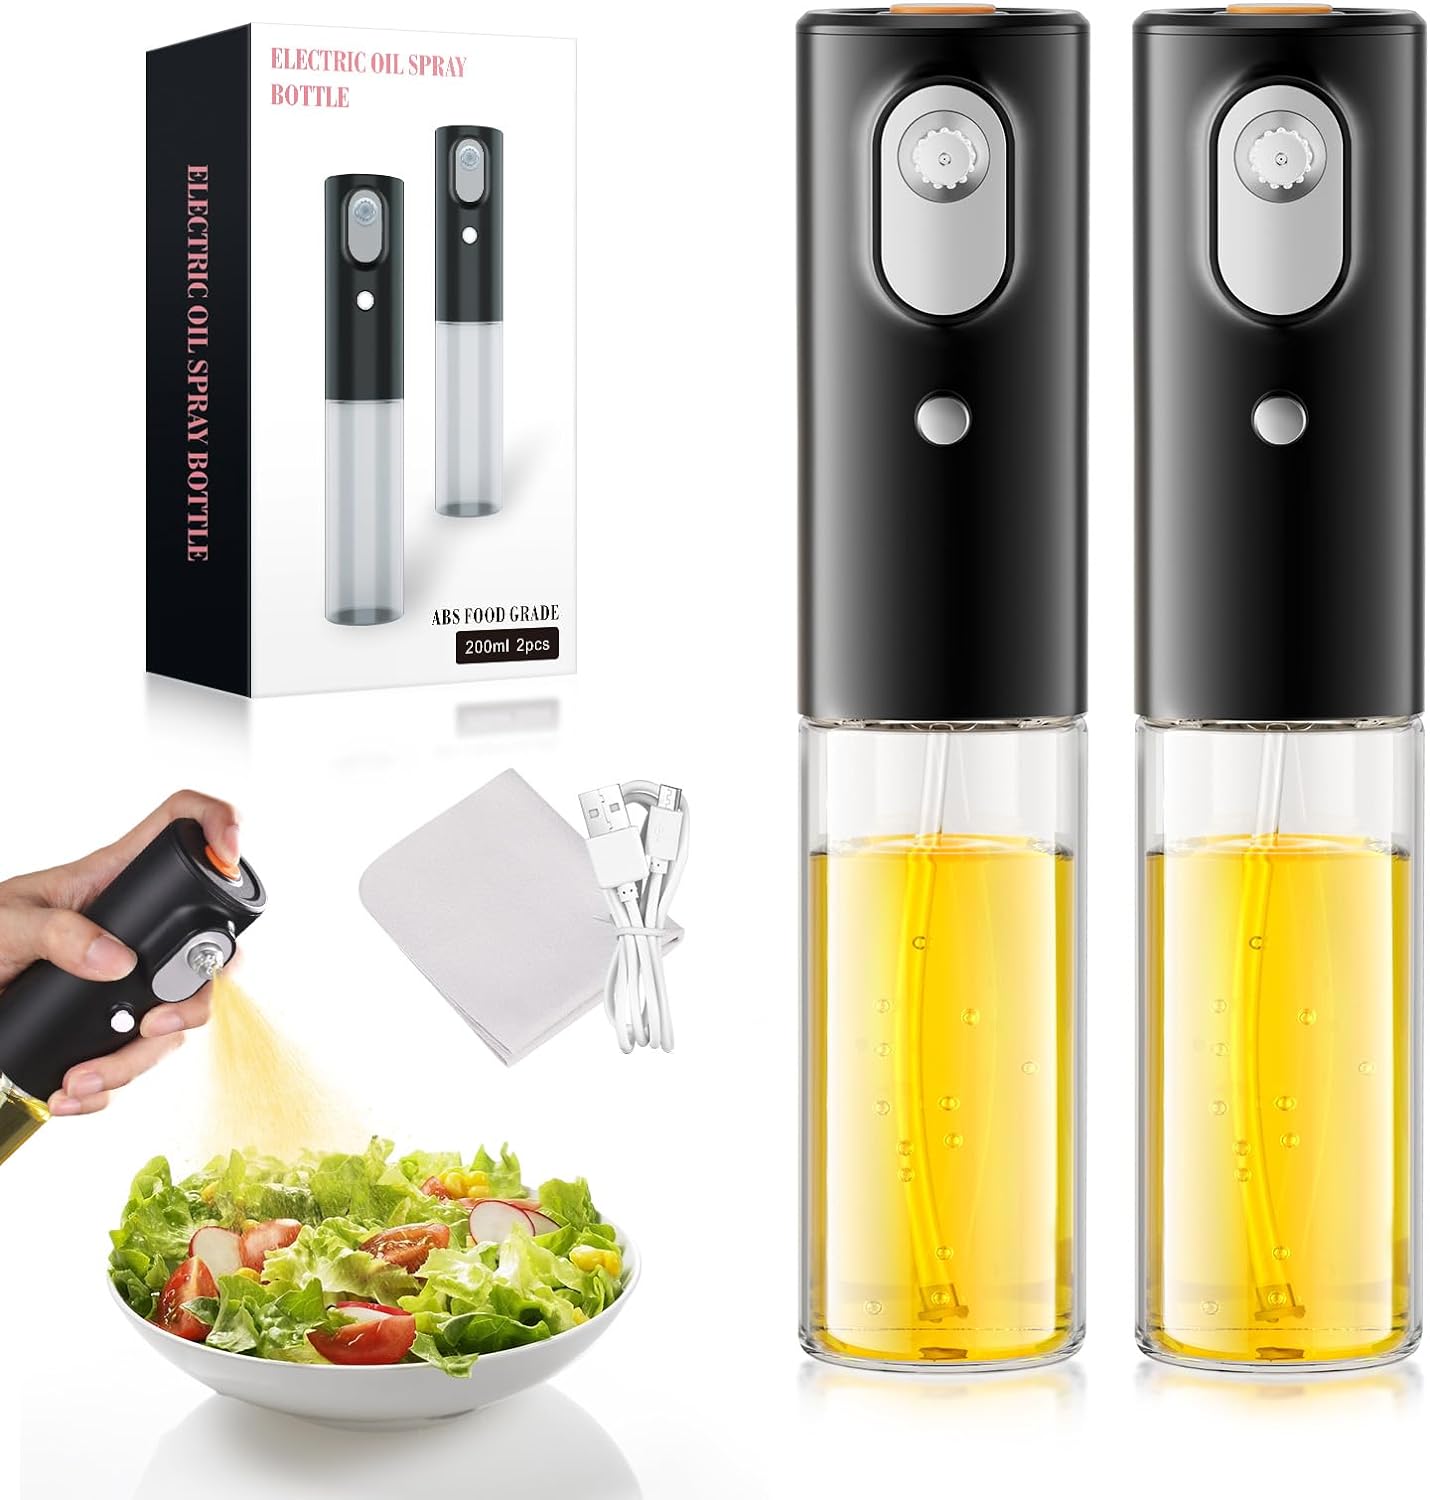 Oil Spray Bottle – Electric Oil Sprayer for Cooking – 200ml Glass Olive Oil Sprayer – Continuous Spray with Portion Control – Two Spray Methods – Kitchen Gadgets Accessories for Air Fryer (2 Pack)